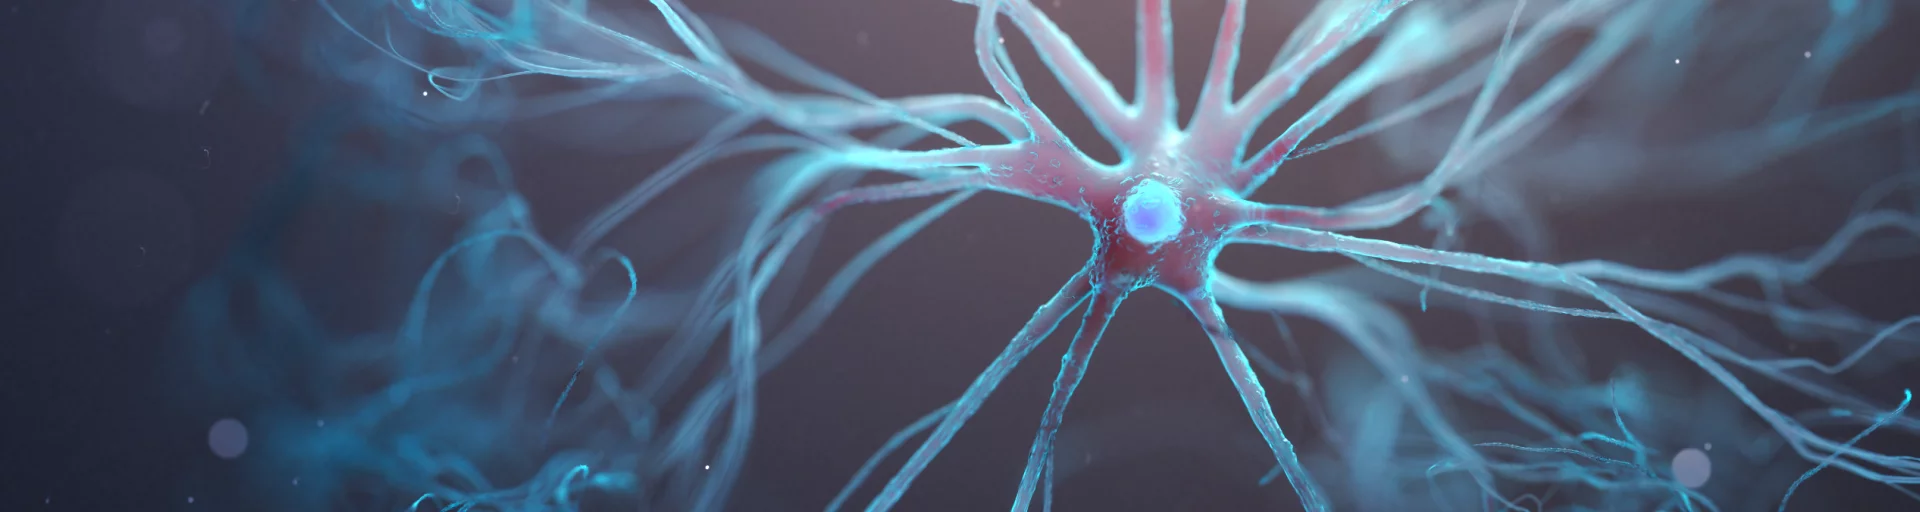 3d rendered graphic depicting a astrocyte cell.